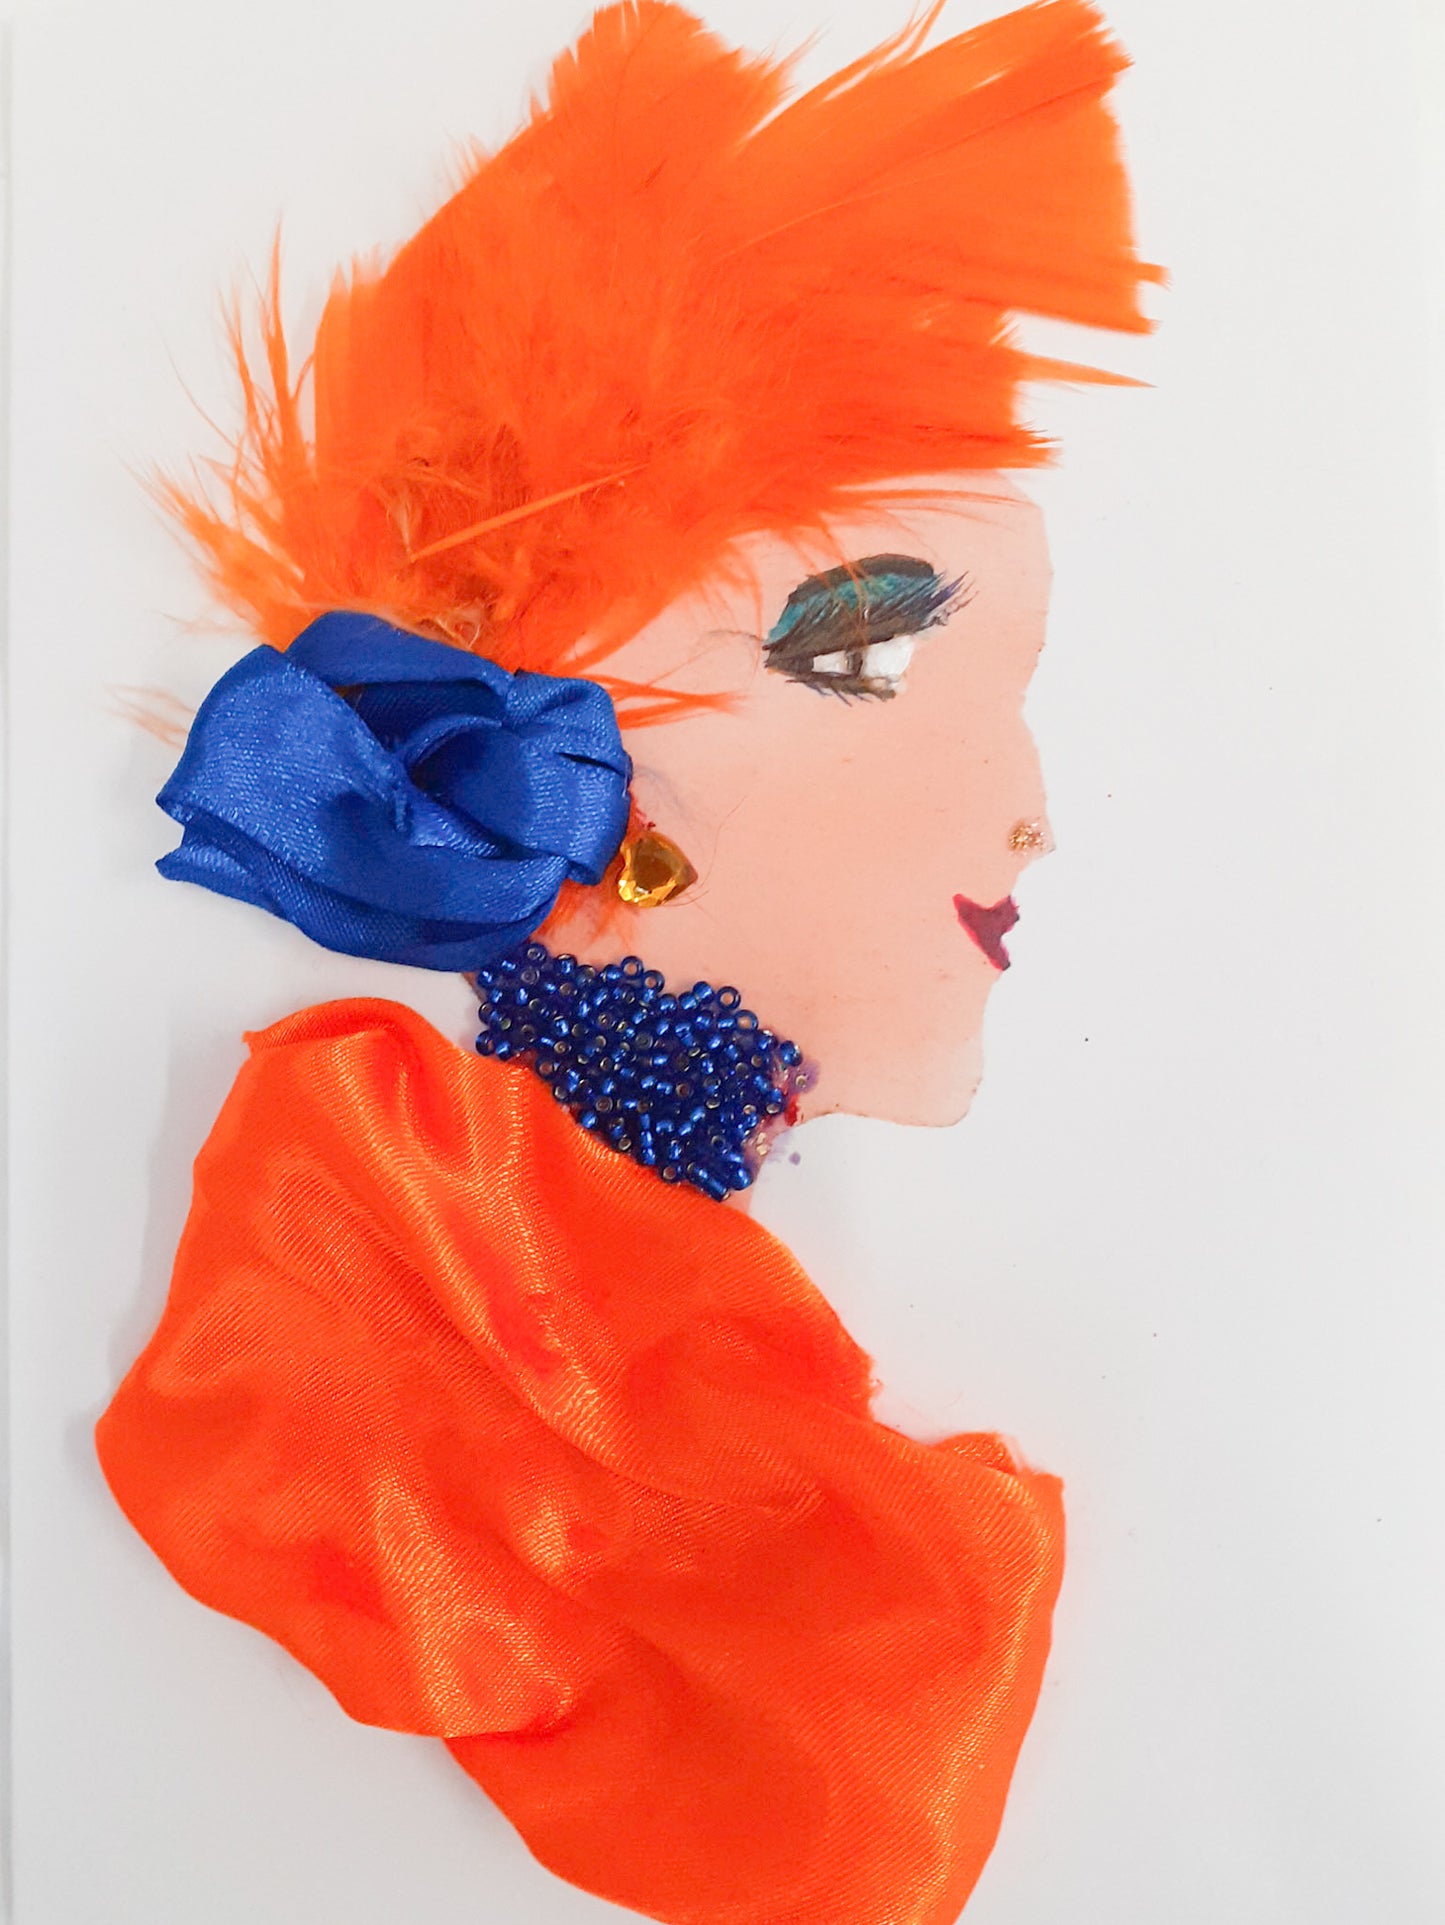 This card is called Citrus Florida. She wears bright orange feathers in her hair with a blue bow, and a blue necklace and orange blouse that matches. 